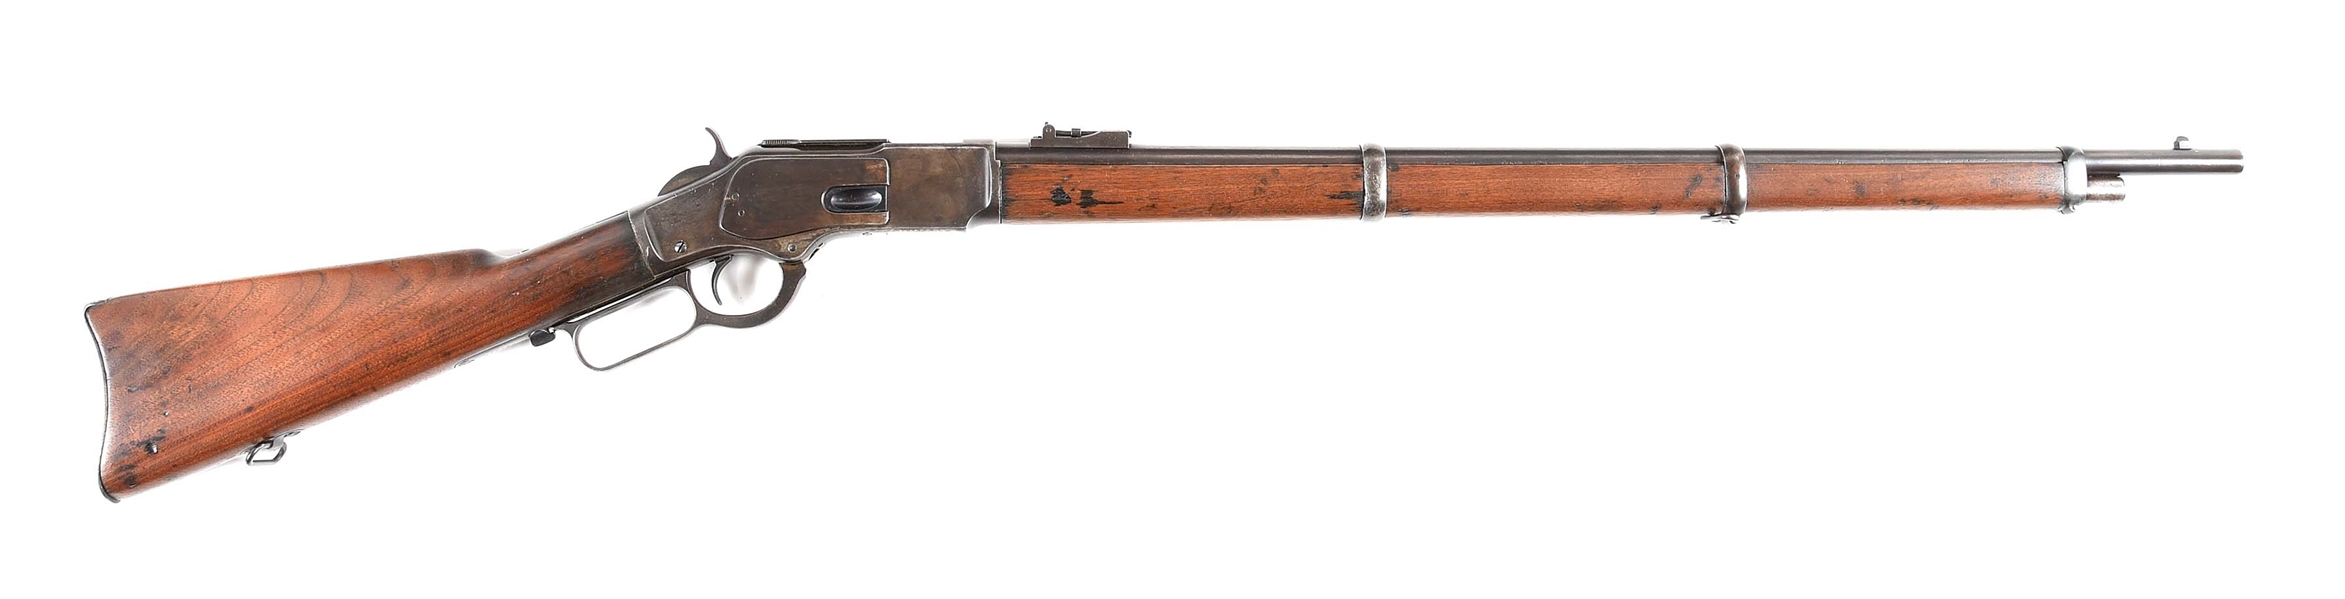 (A) WINCHESTER 1873 .44-40 LEVER ACTION MUSKET.